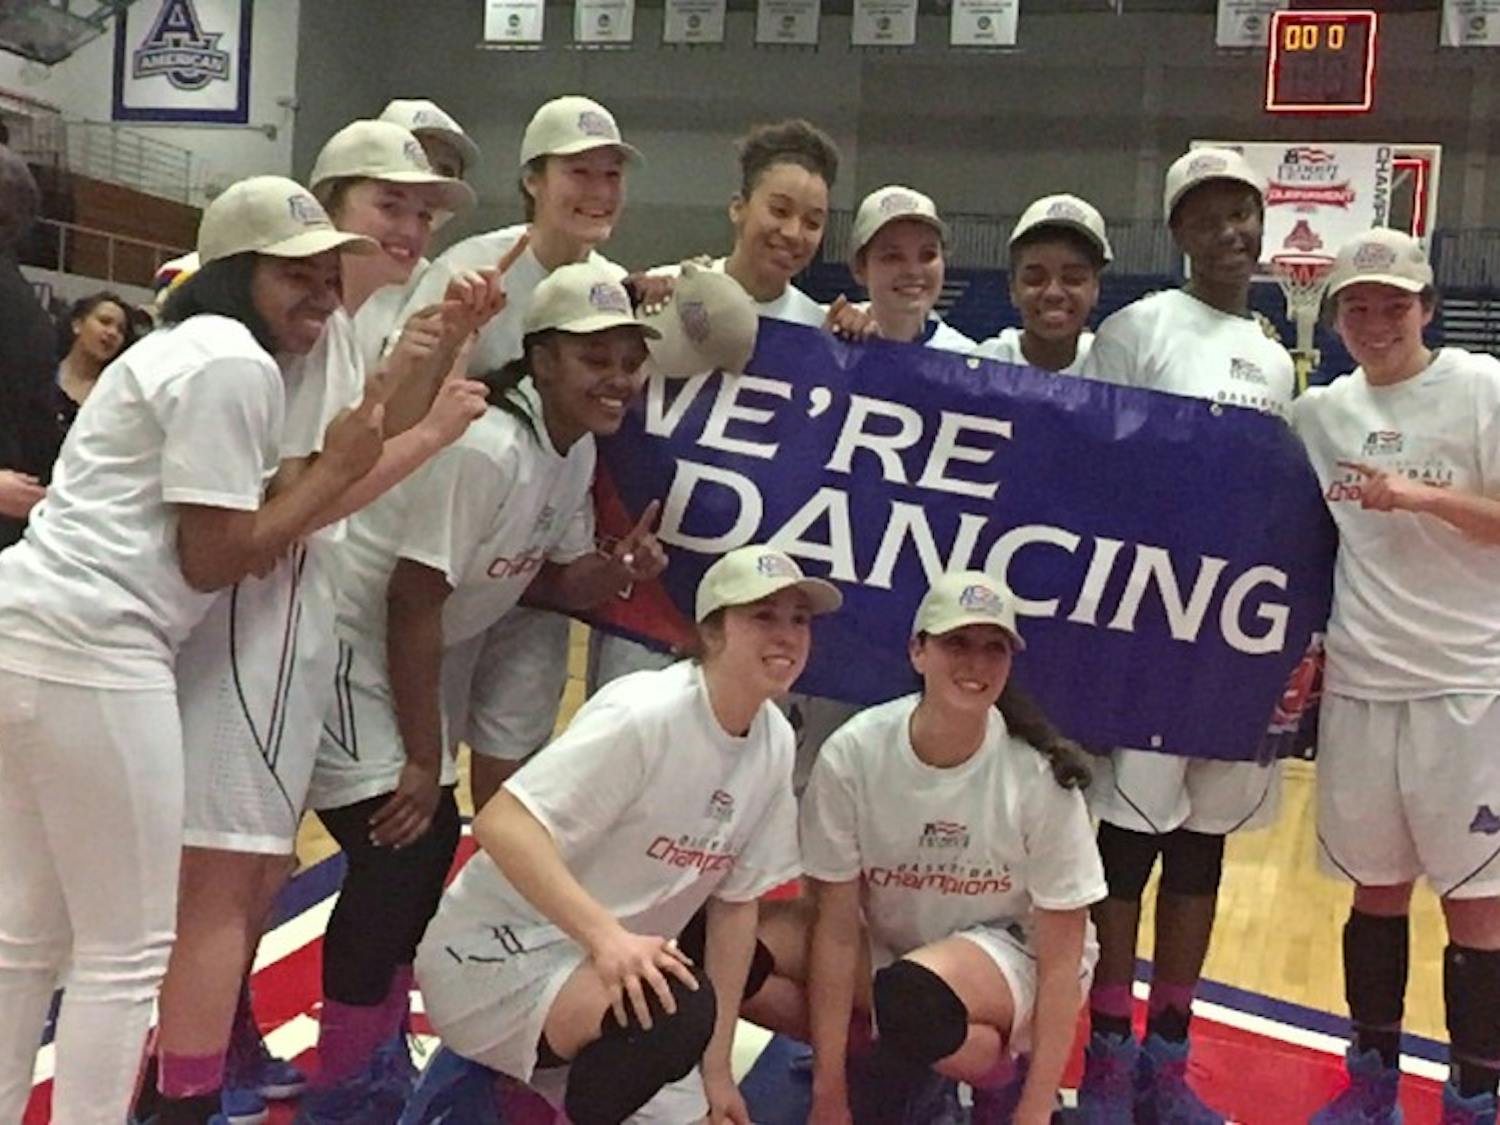 The Eagles hold up a "We're Dancing" sign after beating Lehigh University in the Patriot League Championship.